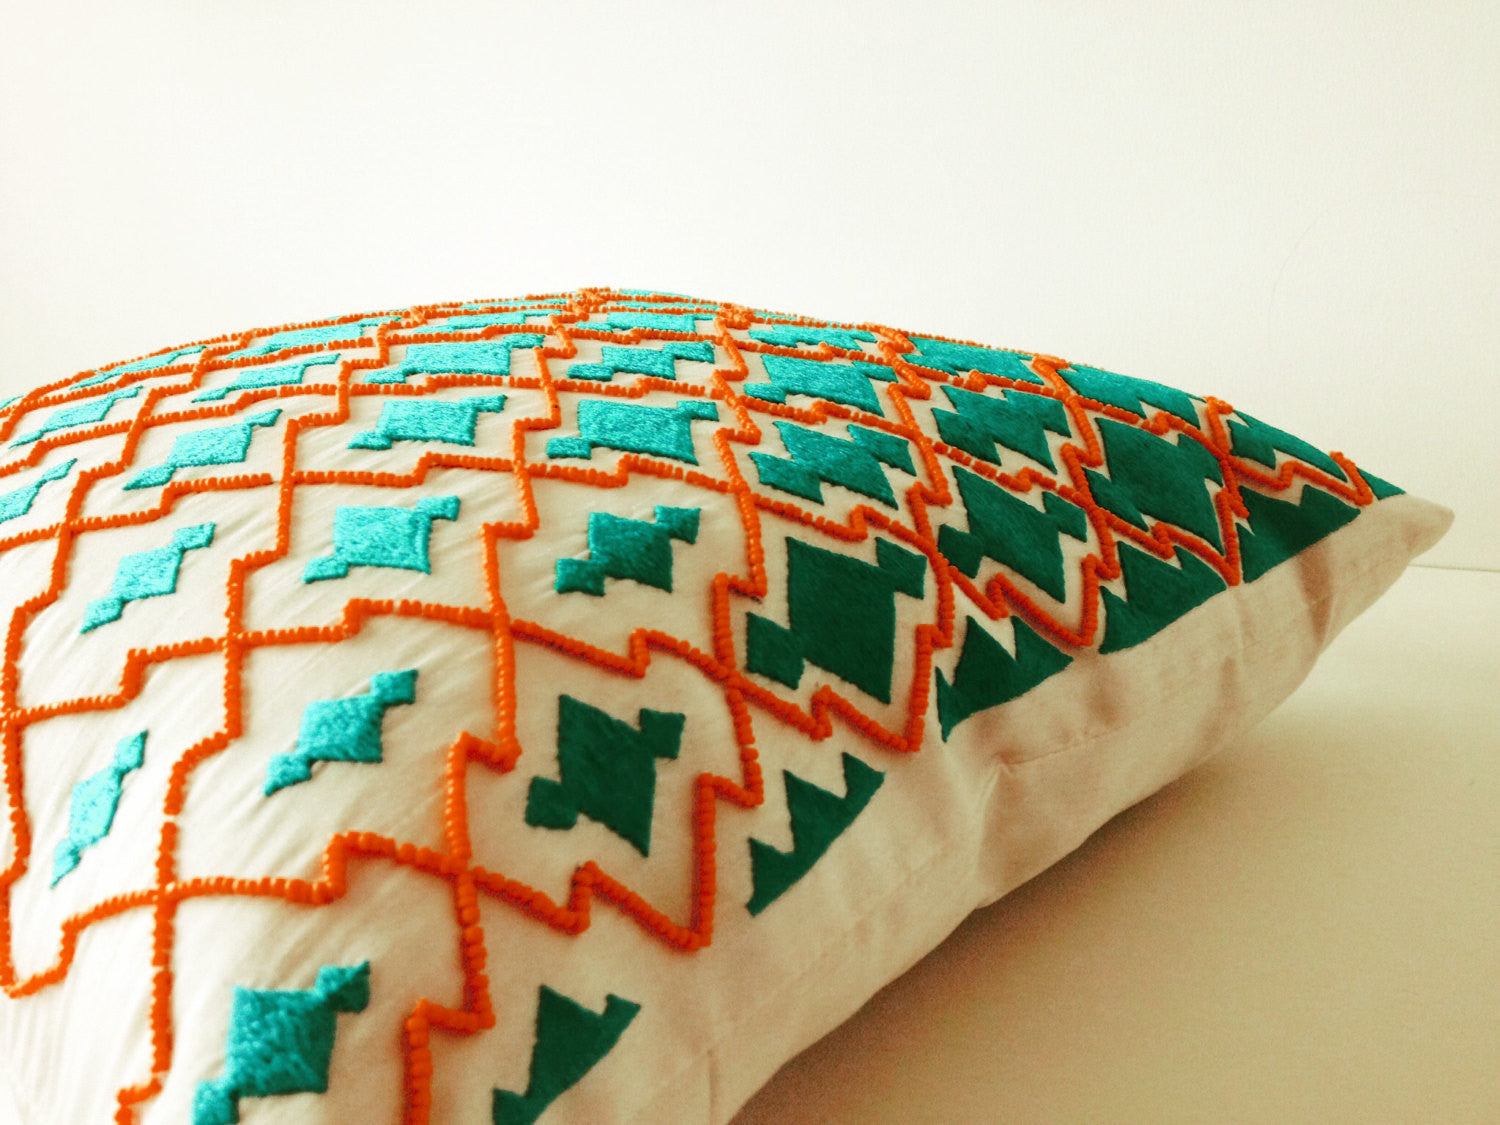 Handmade orange and teal decorative throw pillow cases